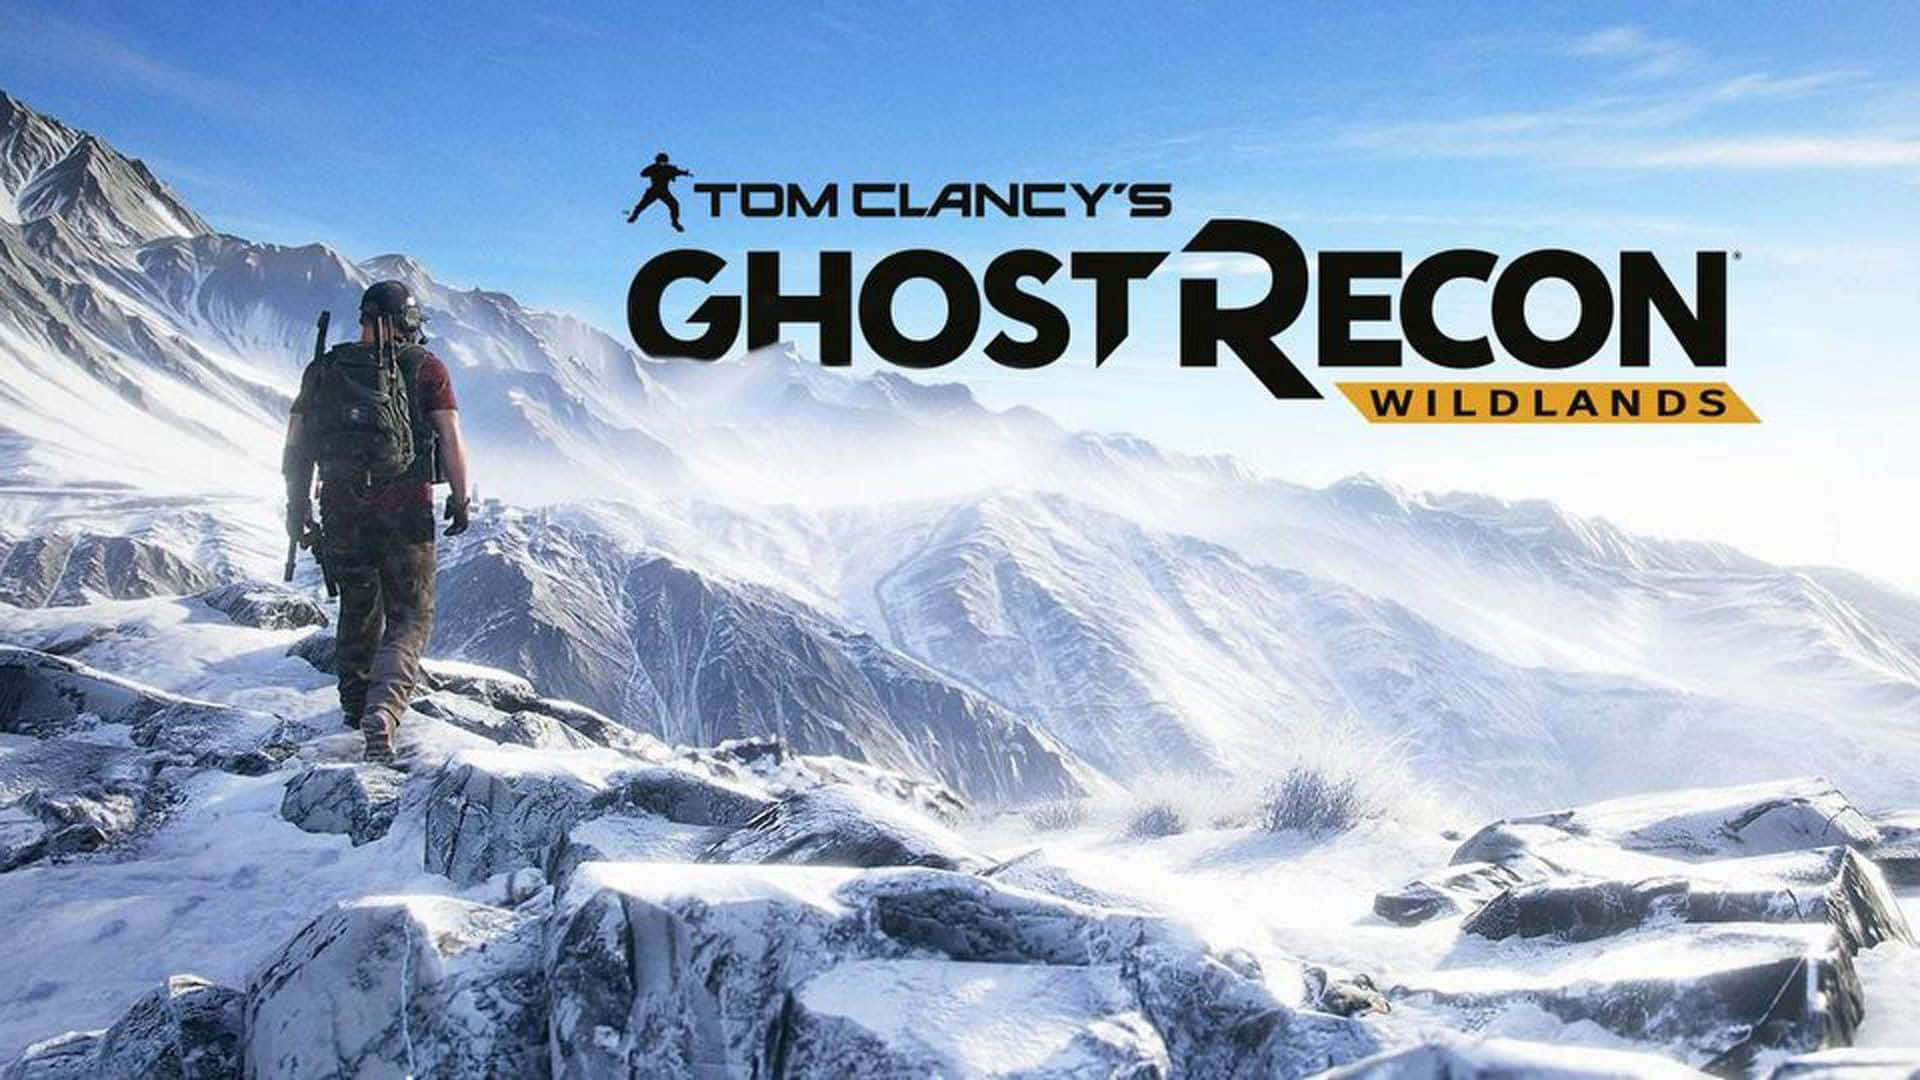 Hd Ghost Recon Wildlands Background A Man Traveling On A Snowy Mountain